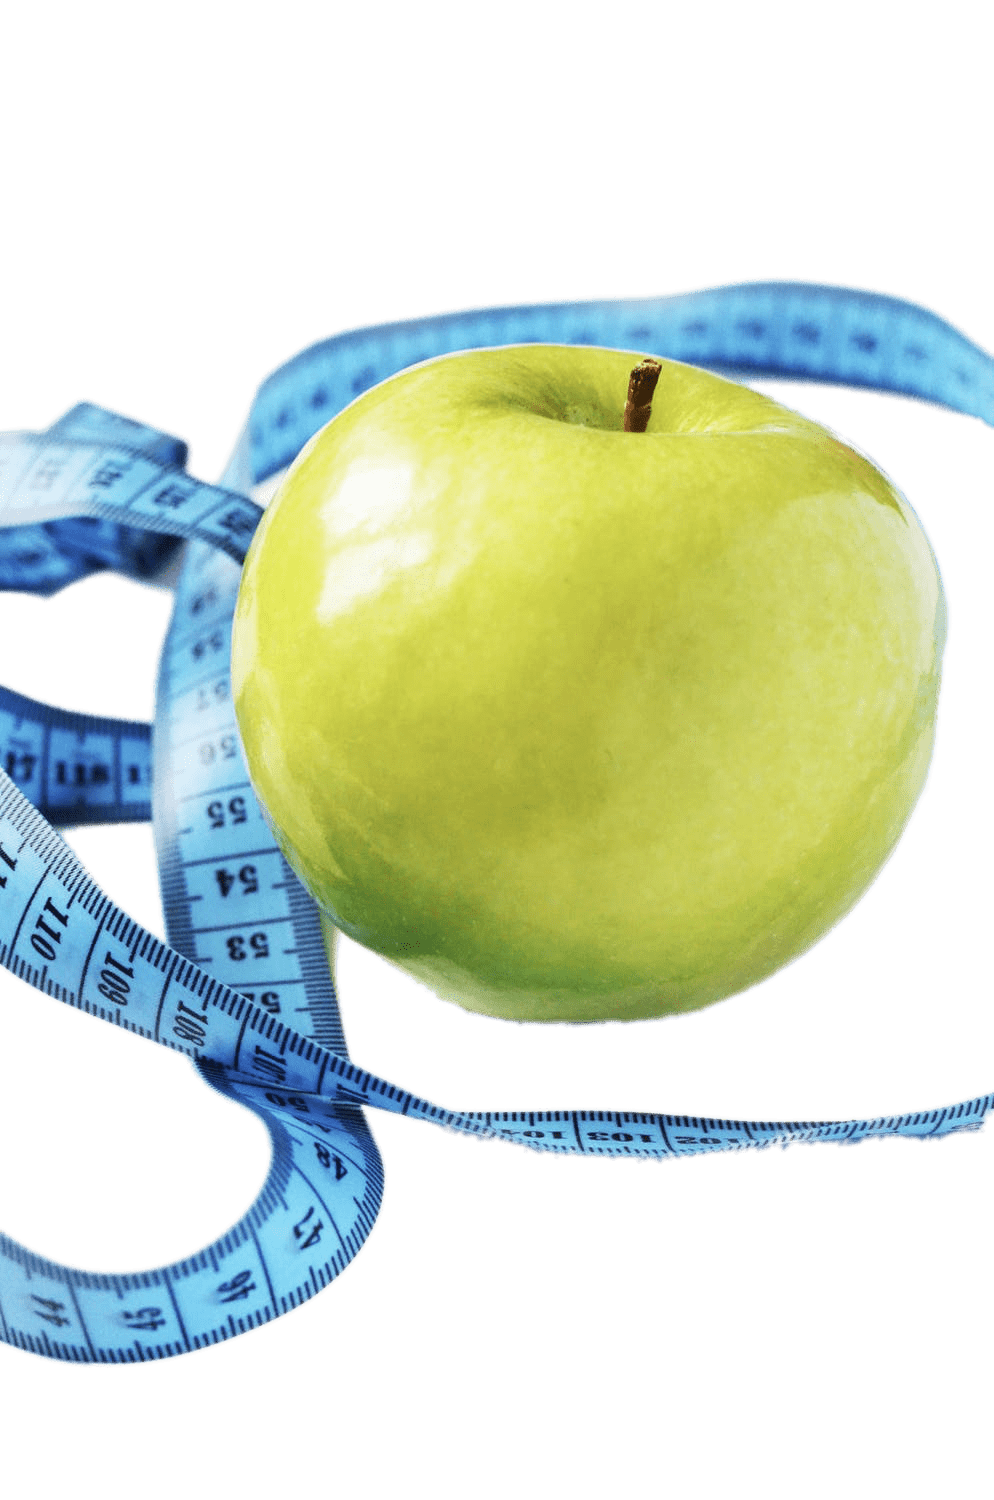 Photos Tape Apple Measure Download HQ PNG Image